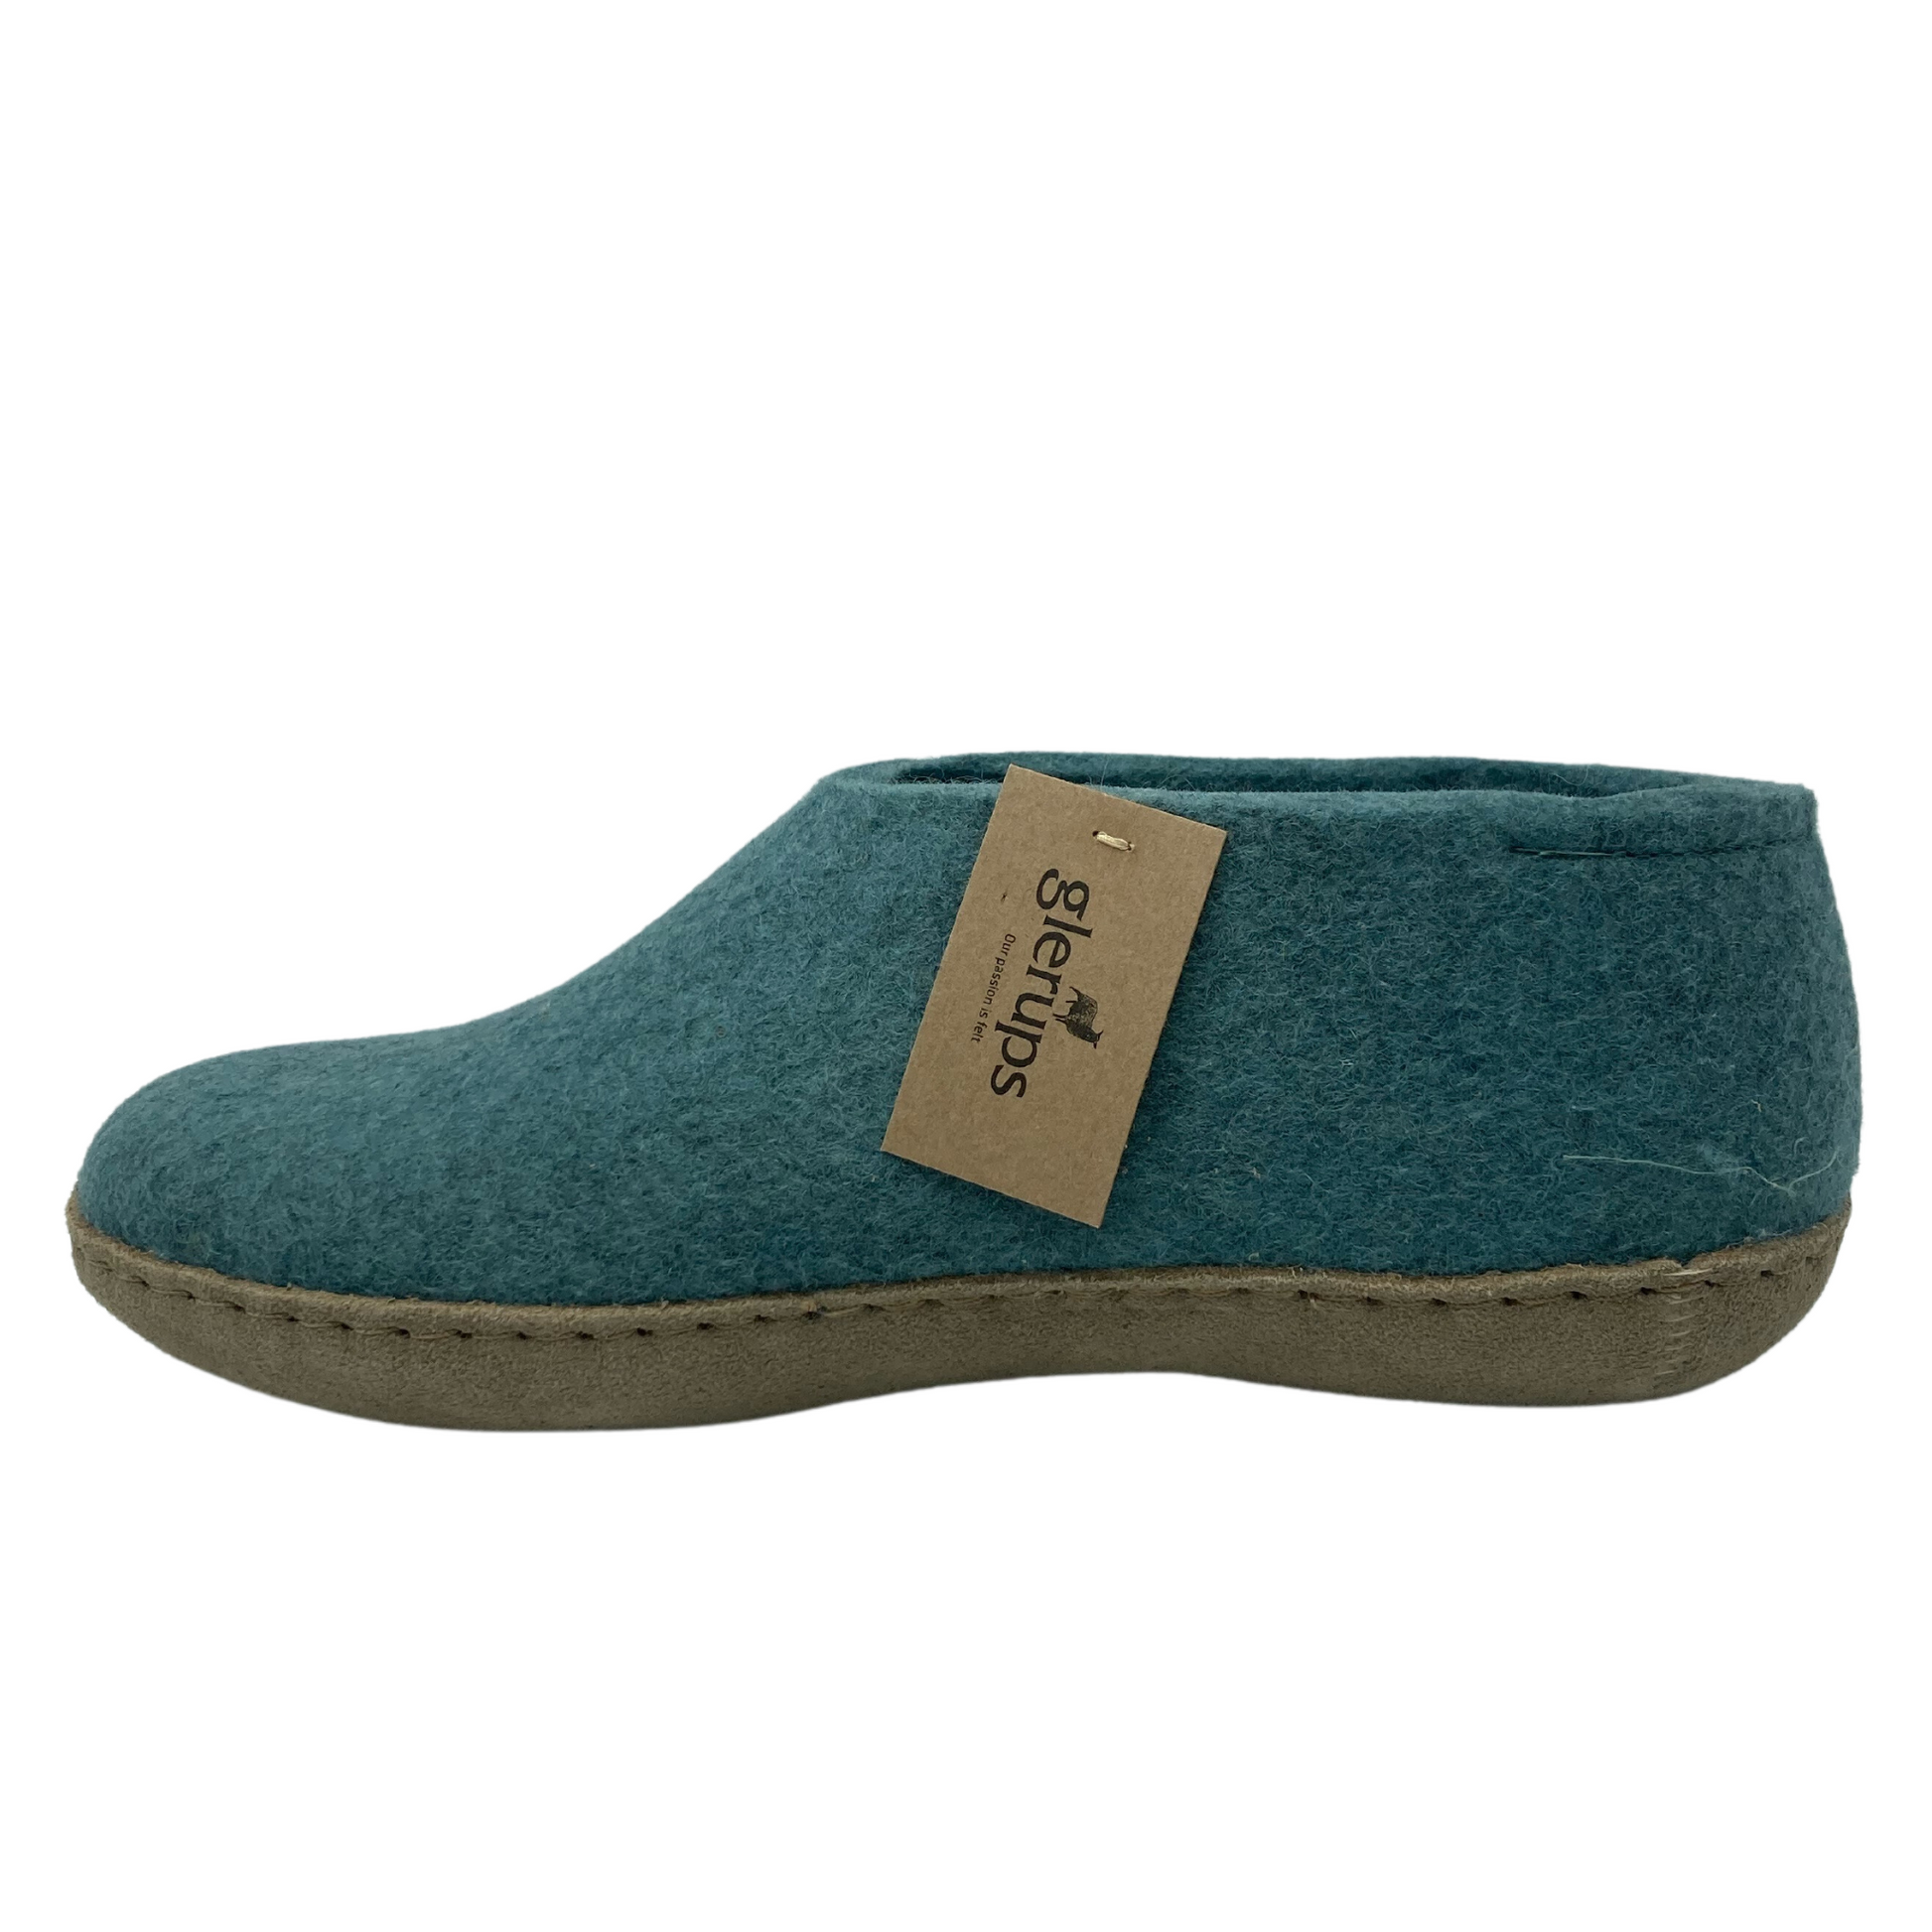 Left facing view of felted wool shoe with suede leather sole